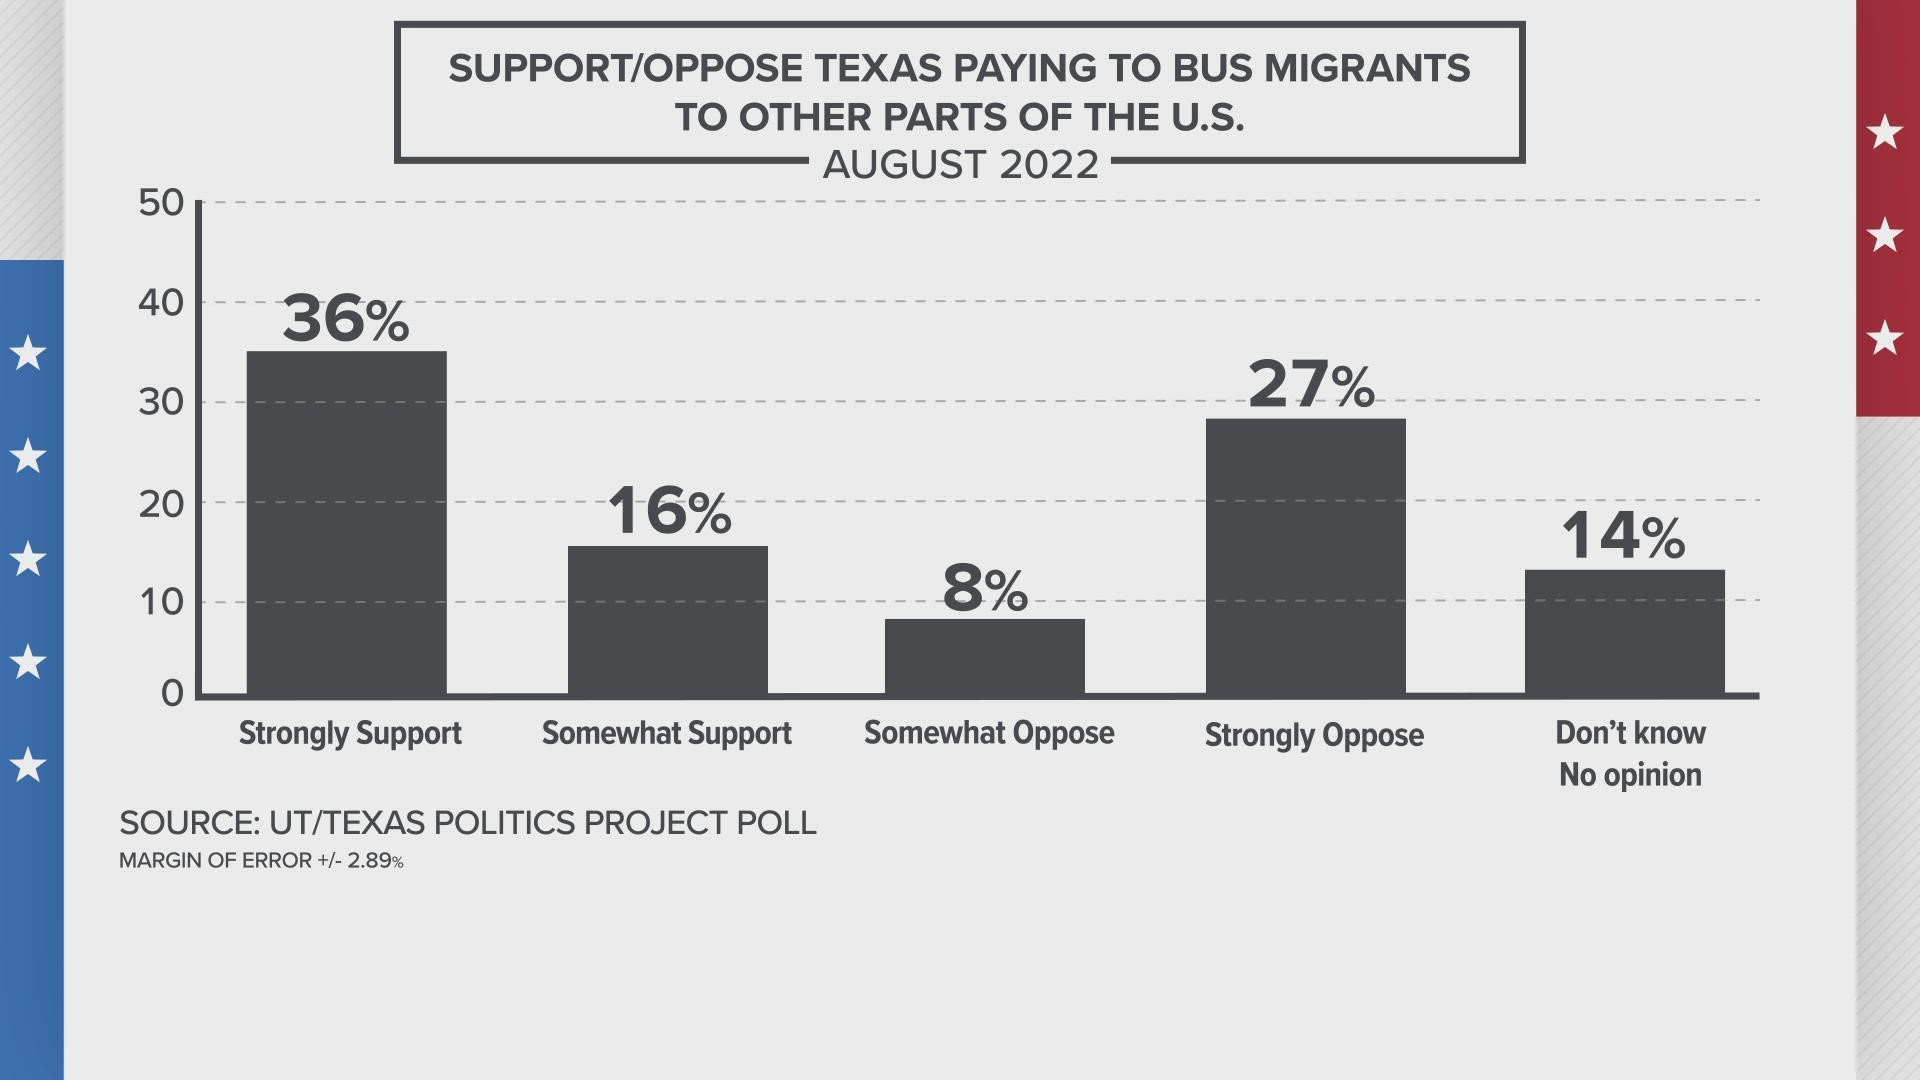 Gov. Greg Abbott's busing program has gotten some backlash. But a new poll from the Texas Politics Project found the policy is pretty popular with voters.